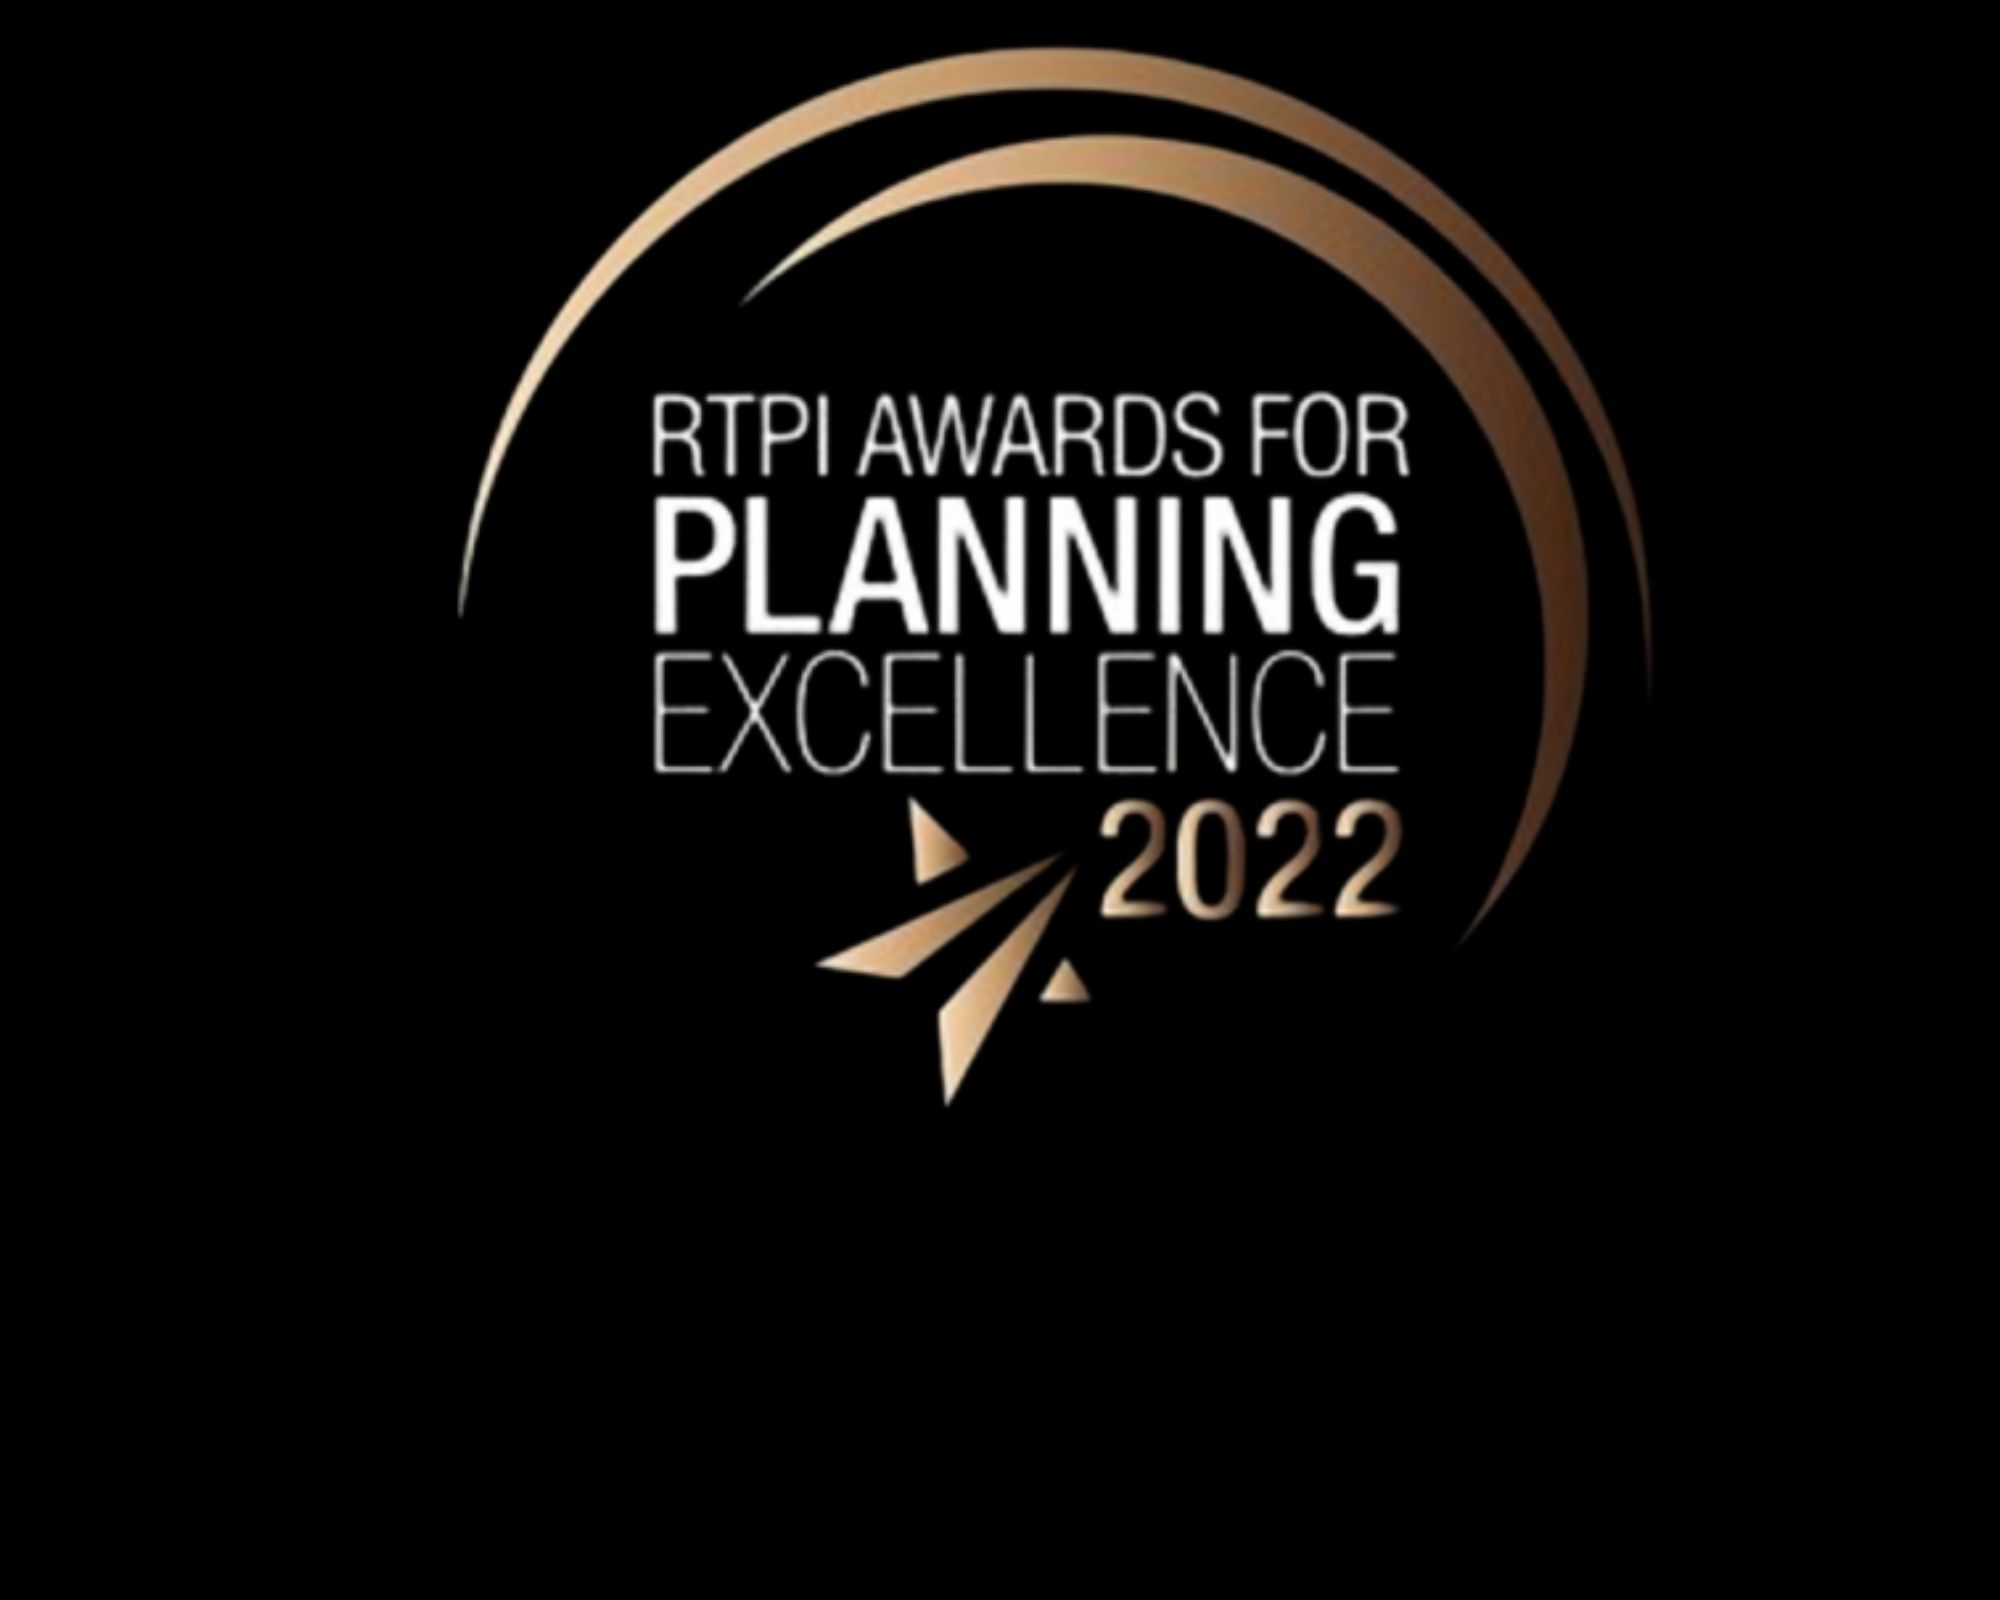  – RTPI Awards for Planning Excellence 2022